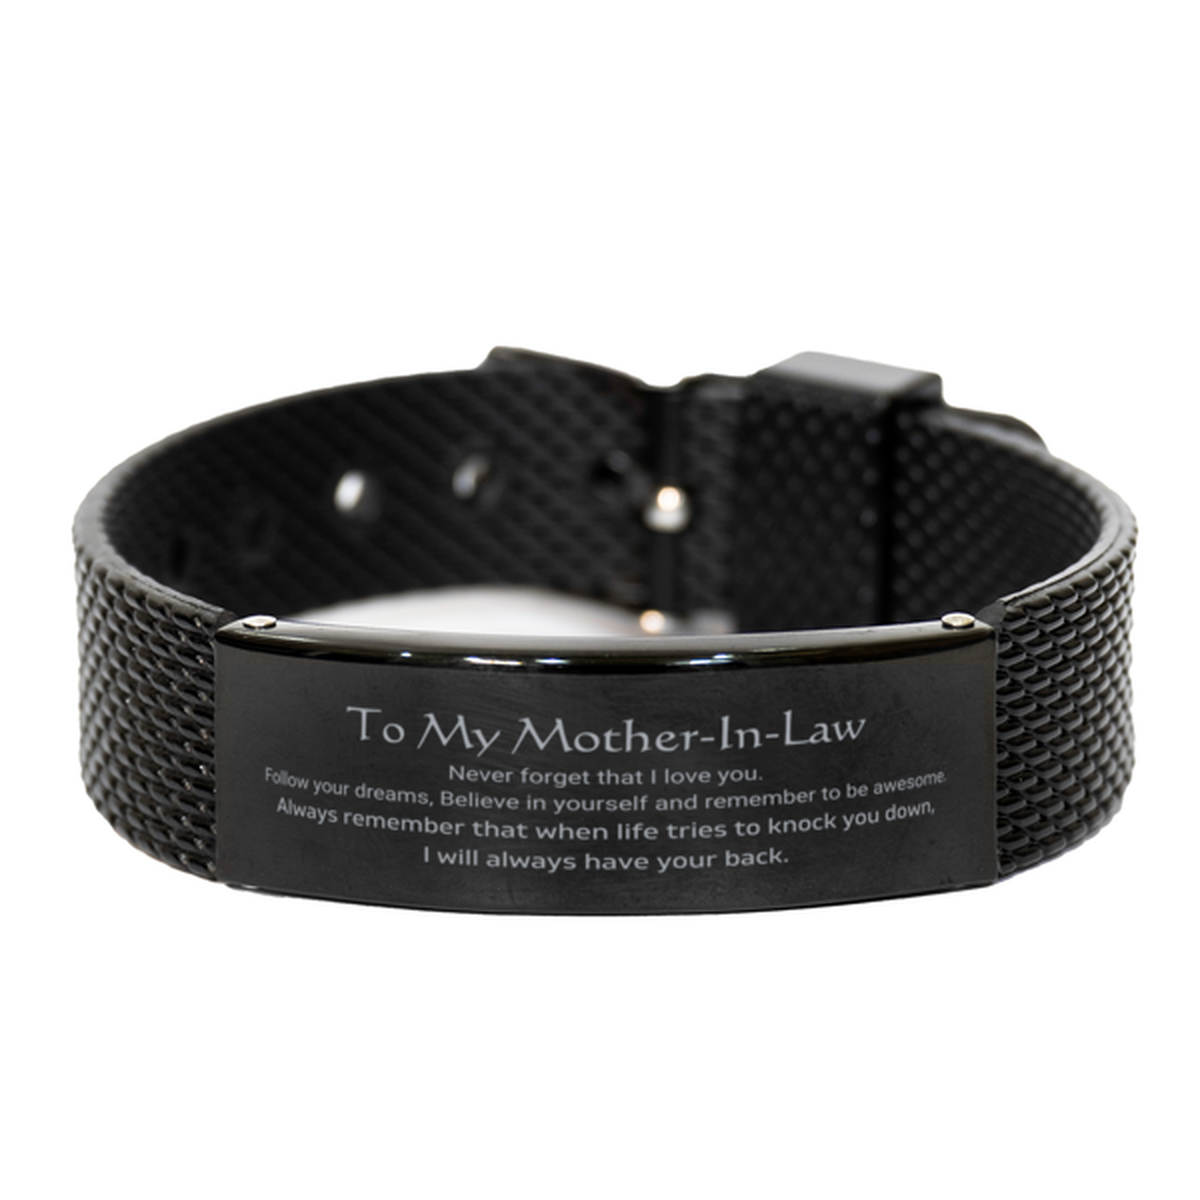 Inspirational Gifts for Mother-In-Law, Follow your dreams, Believe in yourself, Mother-In-Law Black Shark Mesh Bracelet, Birthday Christmas Unique Gifts For Mother-In-Law